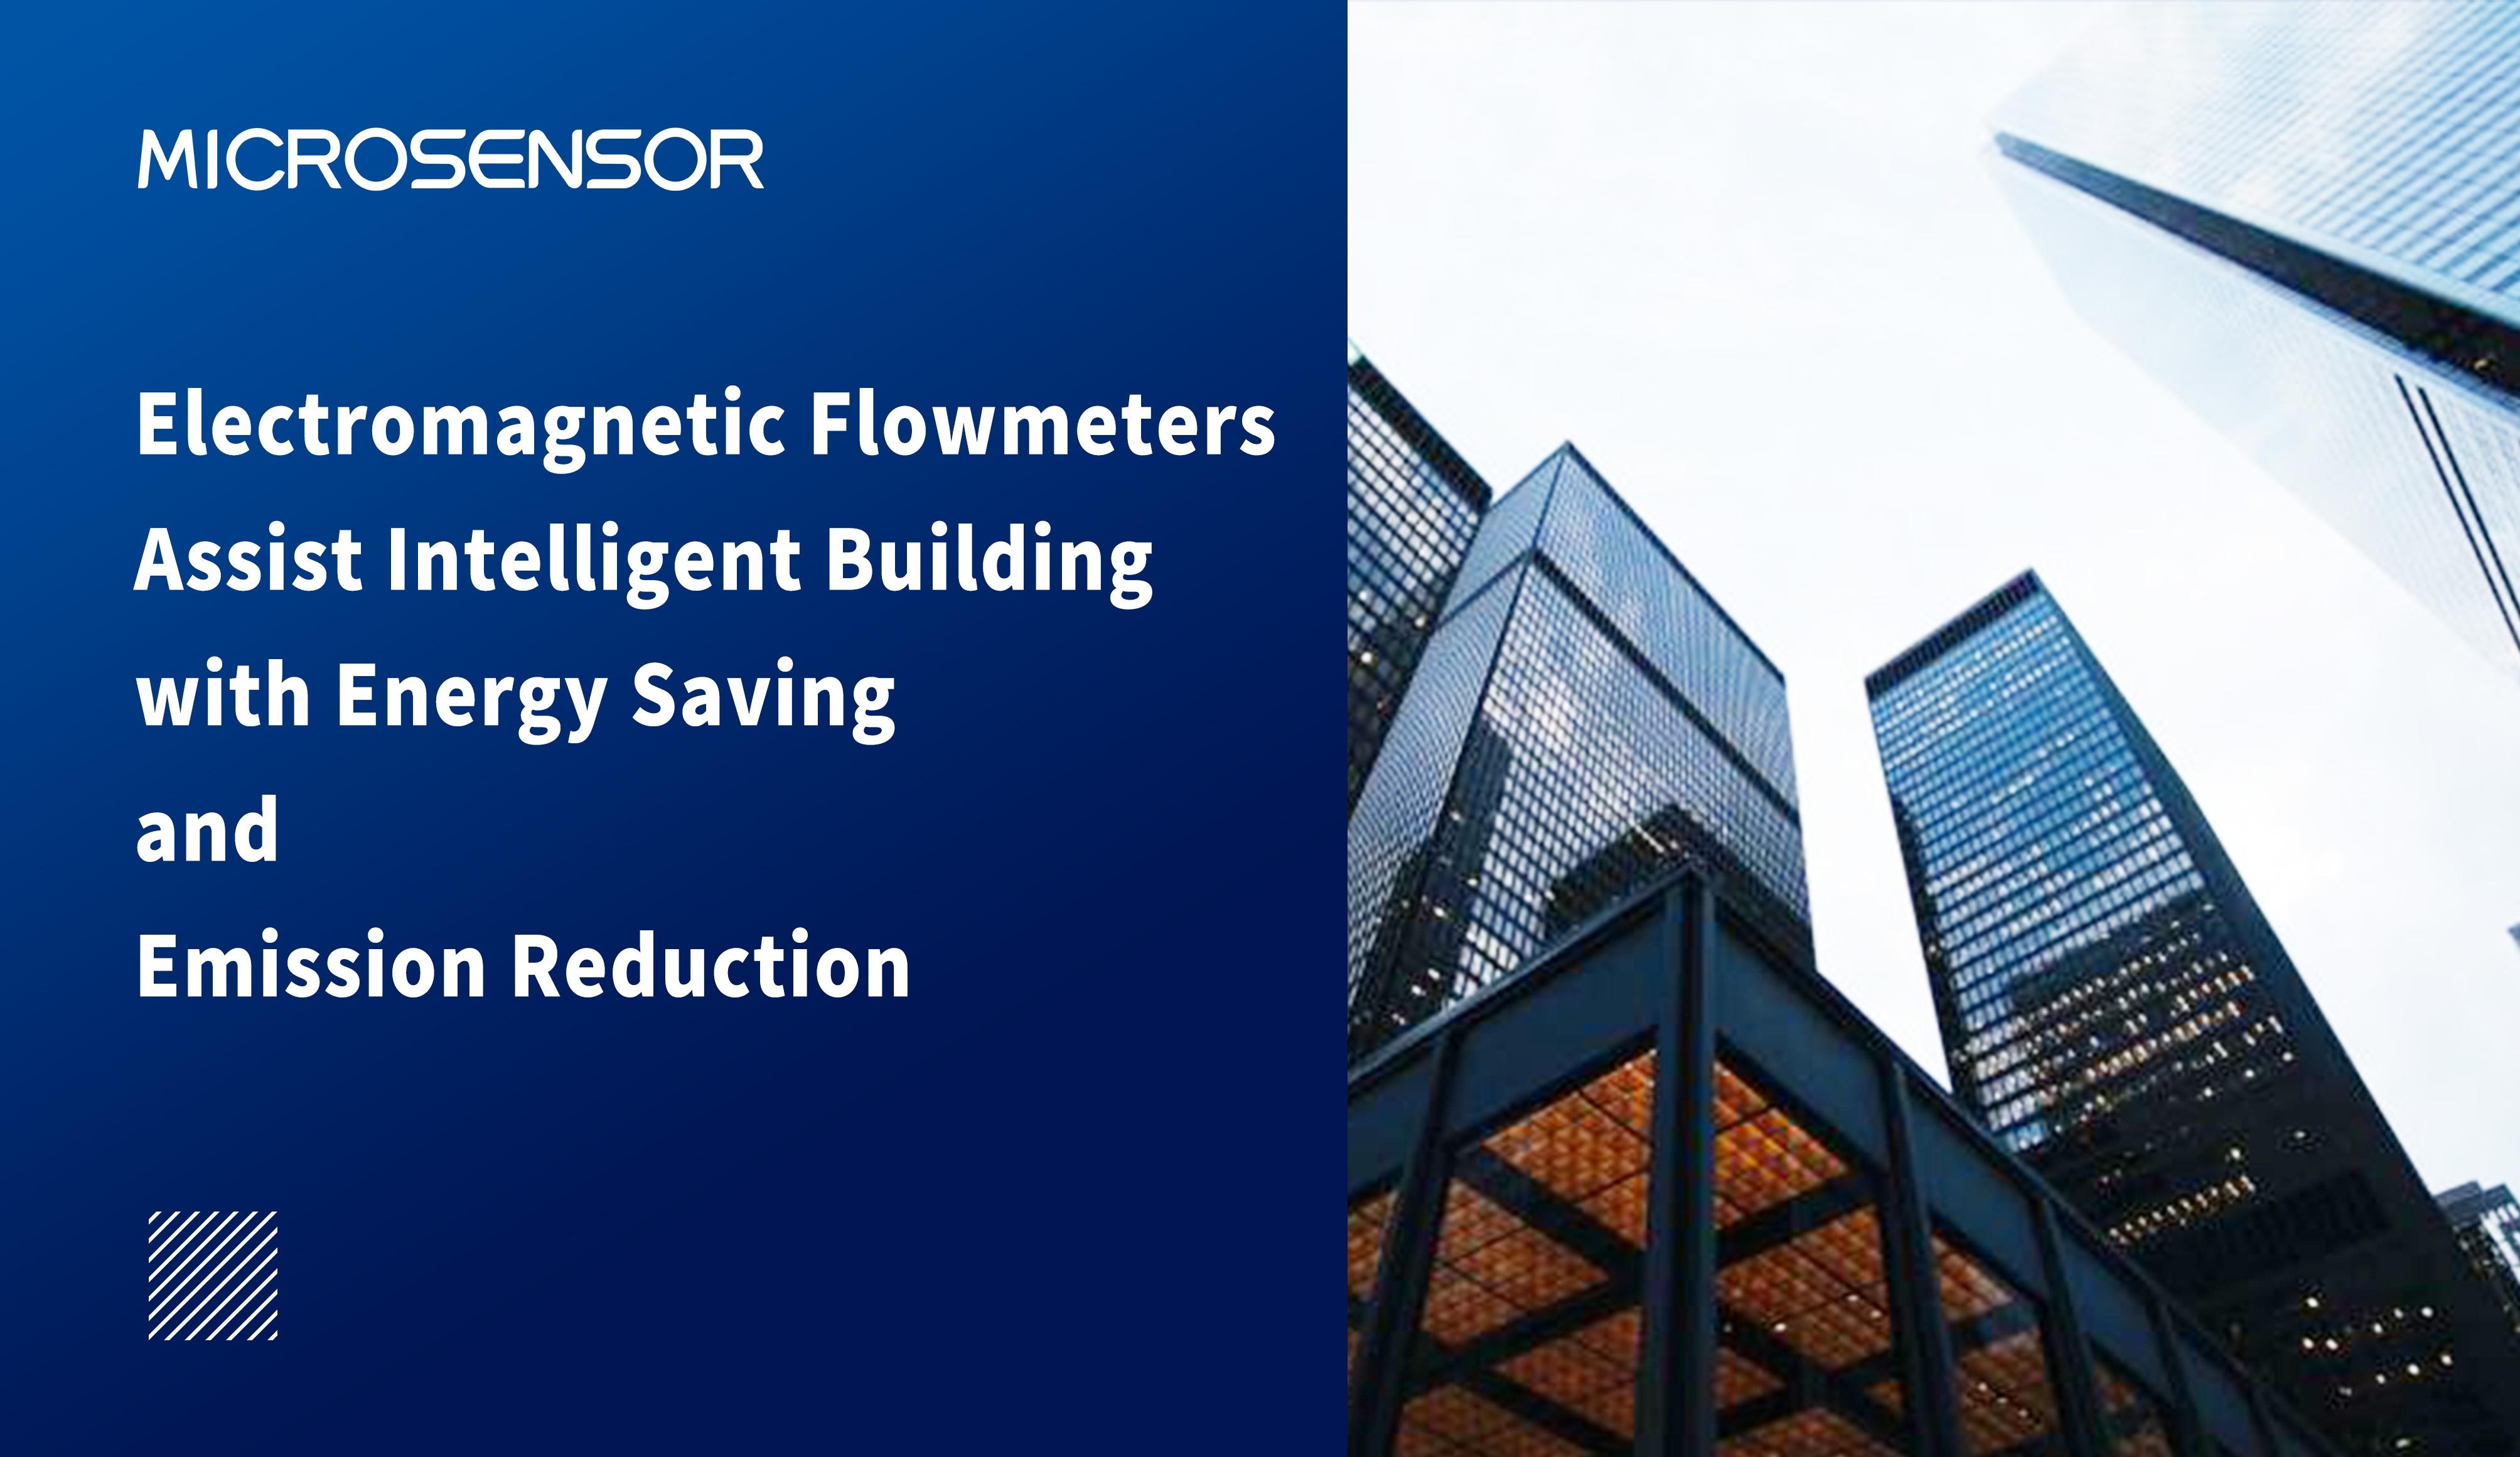 Electromagnetic Flowmeters Assist Intelligent Building with Energy Saving and Emission Reduction